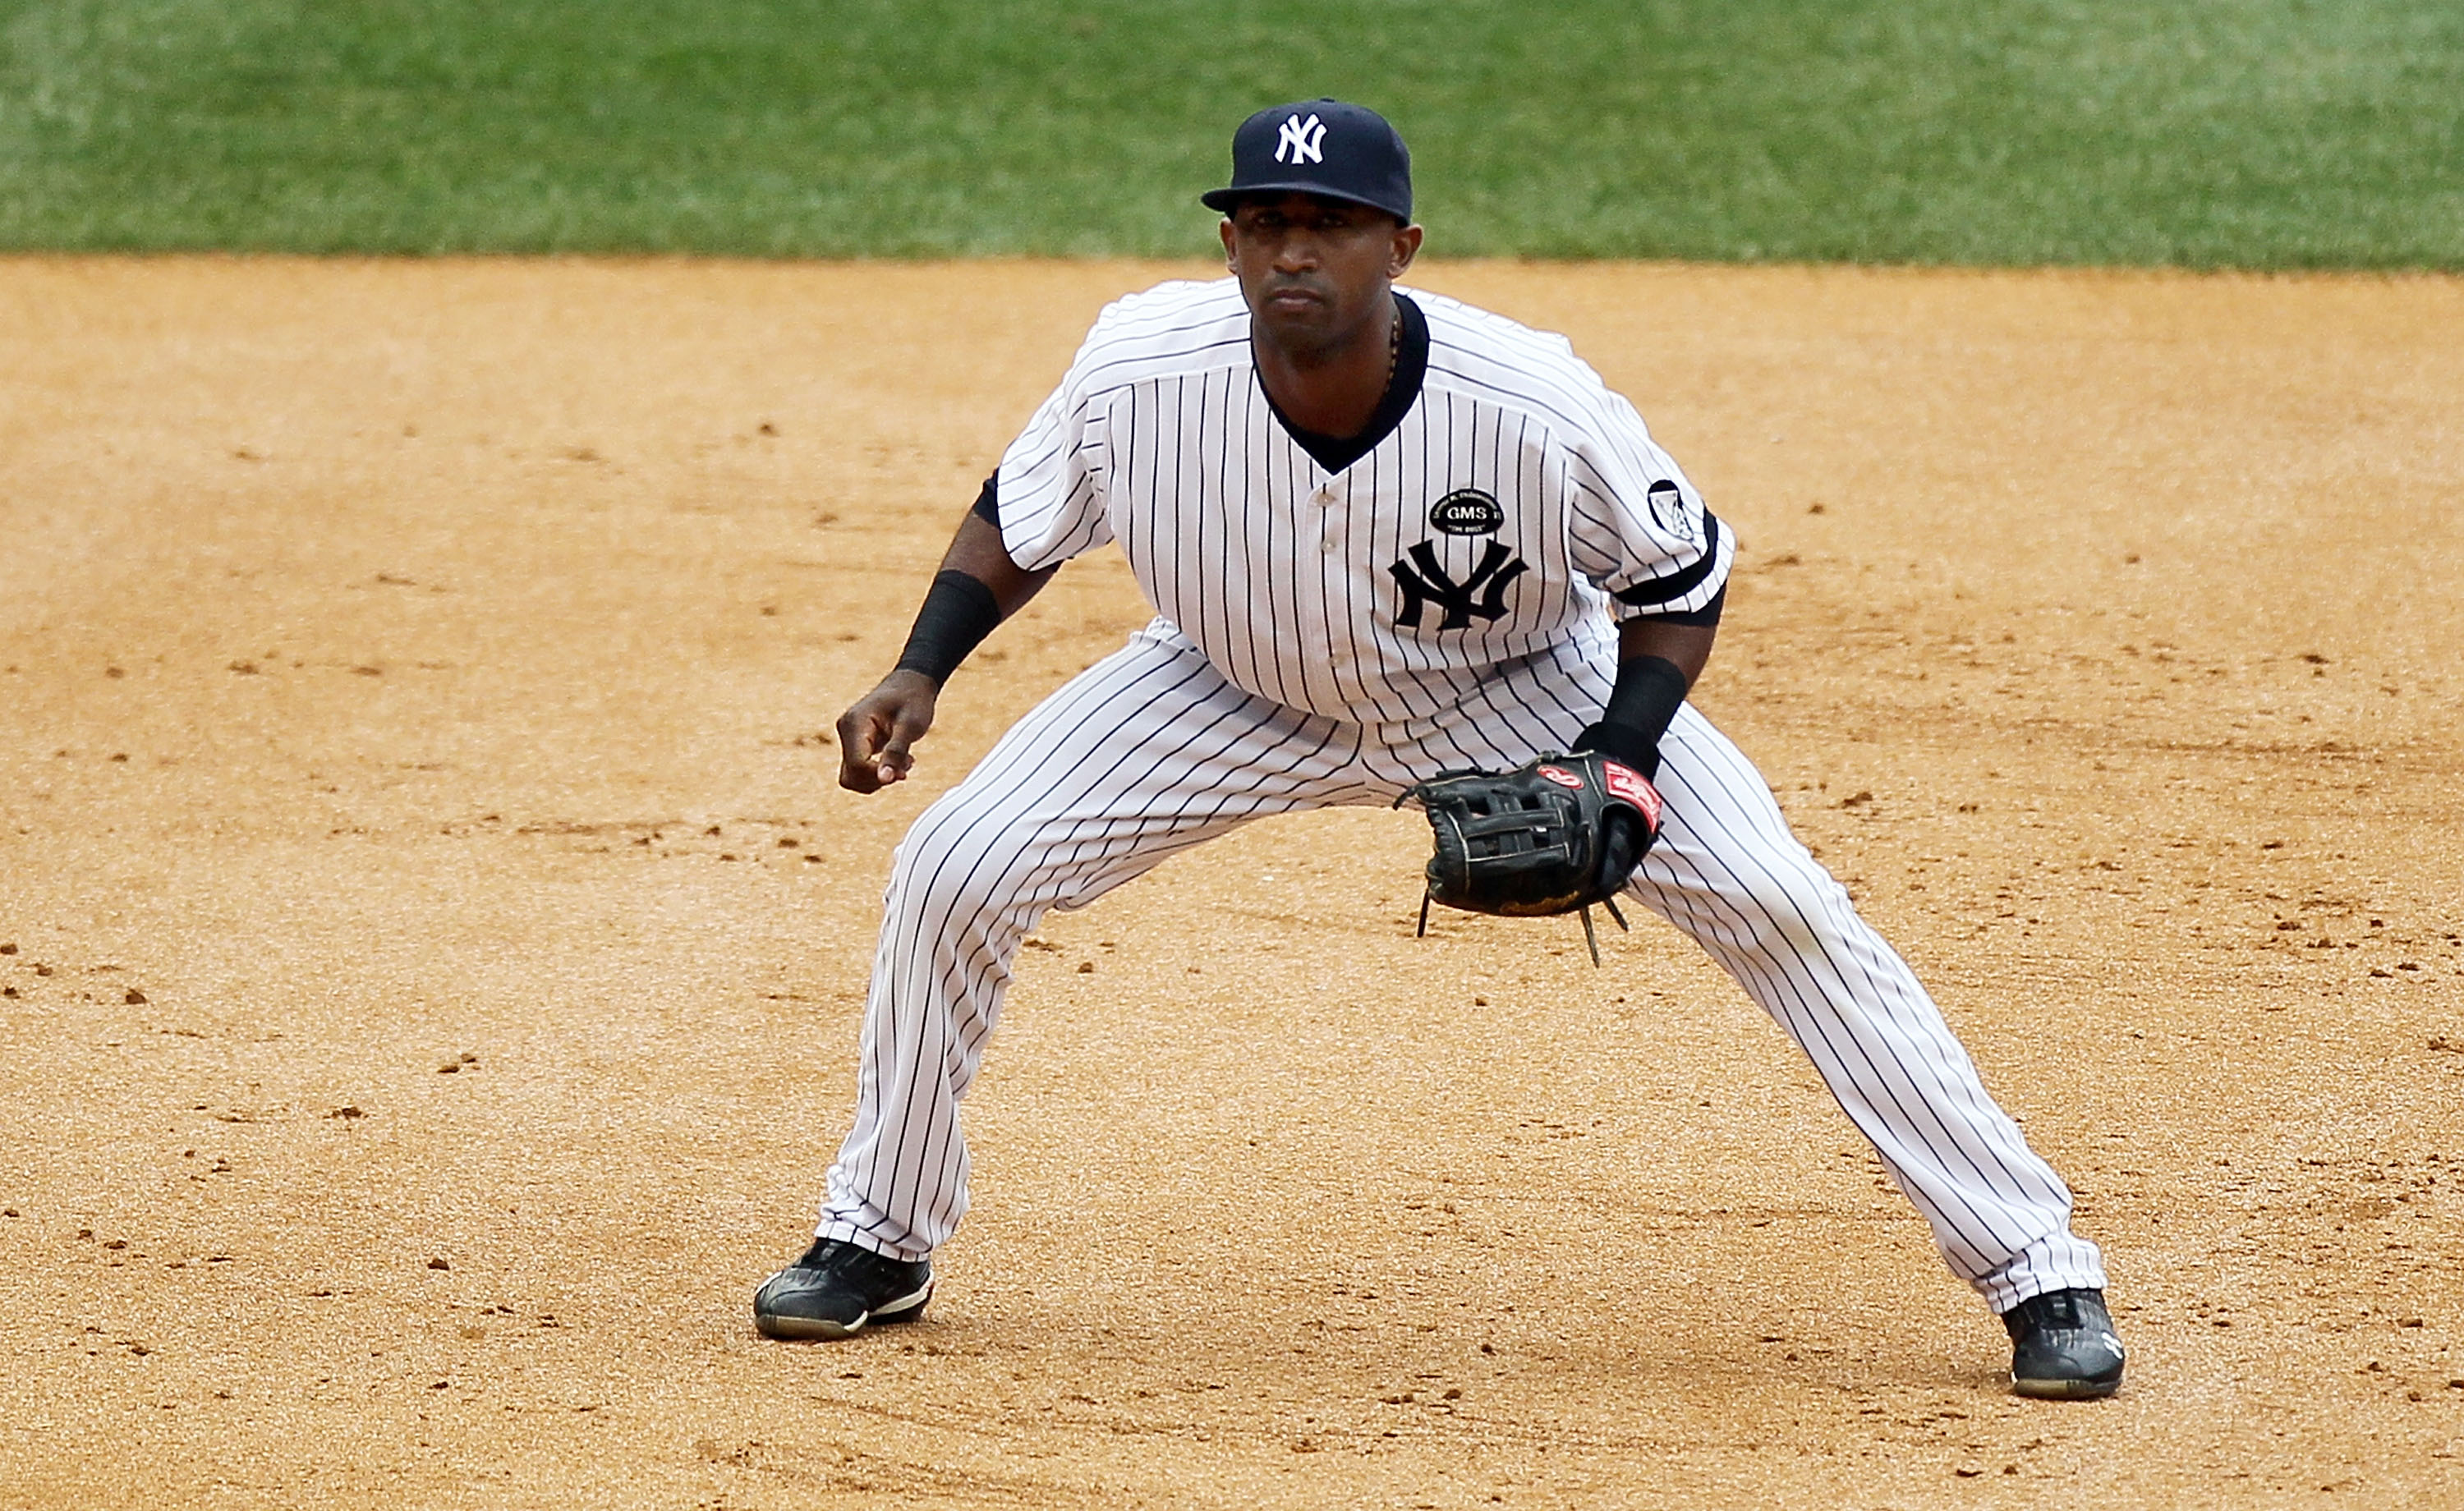 NEW YORK - AUGUST 22:  Eduardo Nunez #12 of the New York Yankees in action against the Seattle Mariners on August 22, 2010 at Yankee Stadium in the Bronx borough of New York City.The Yankees defeated the Mariners 10-0.  (Photo by Jim McIsaac/Getty Images)